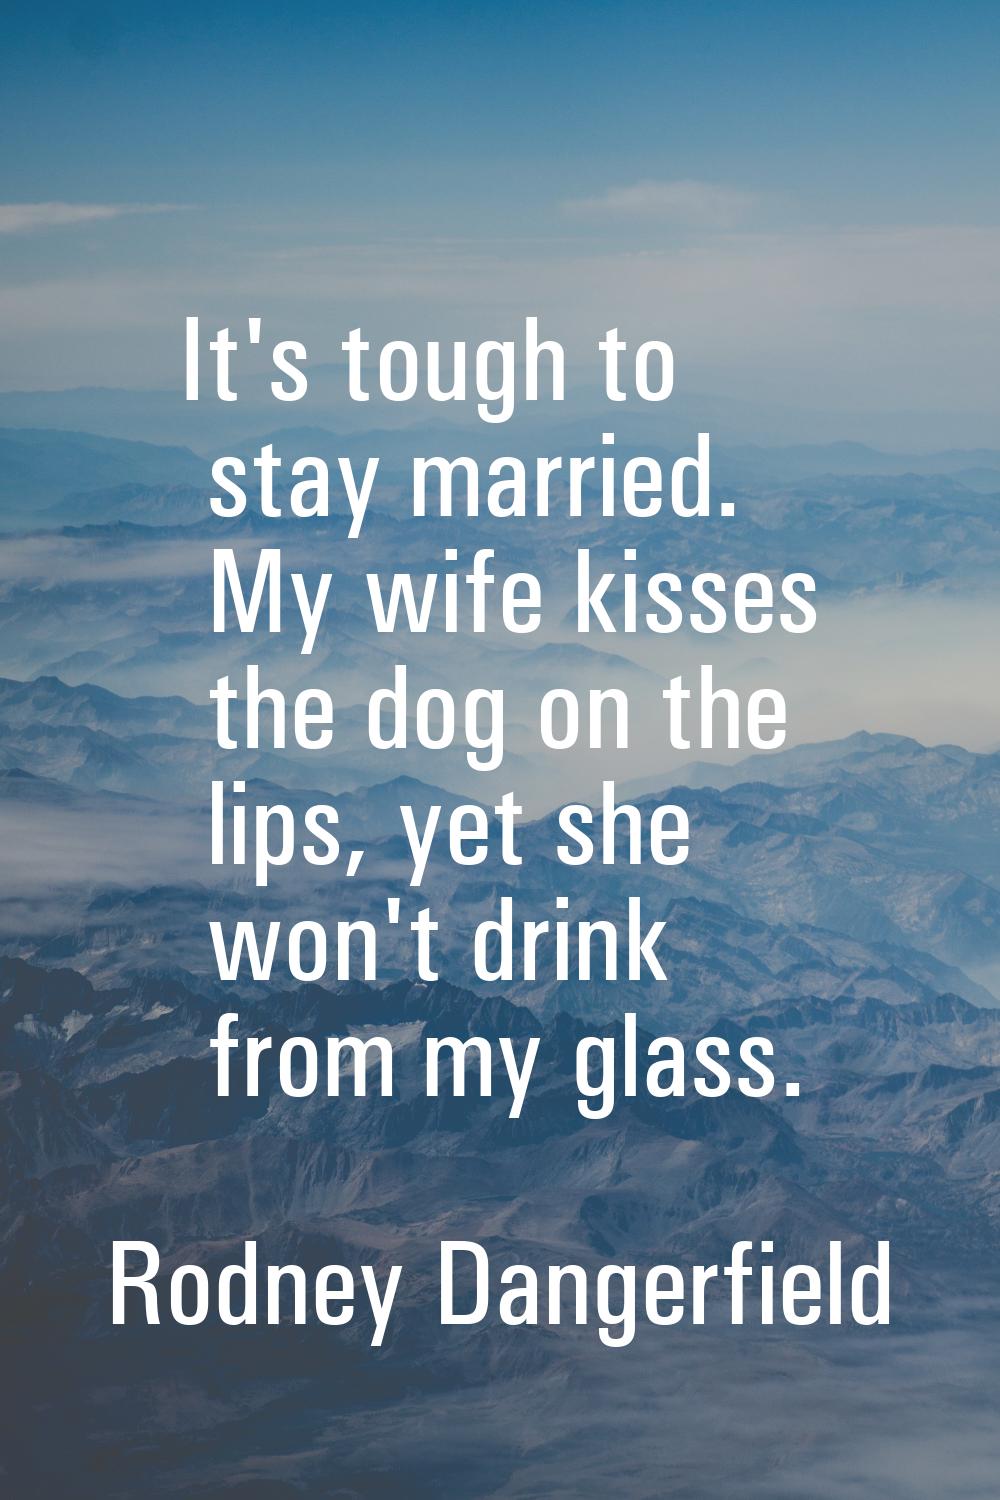 It's tough to stay married. My wife kisses the dog on the lips, yet she won't drink from my glass.